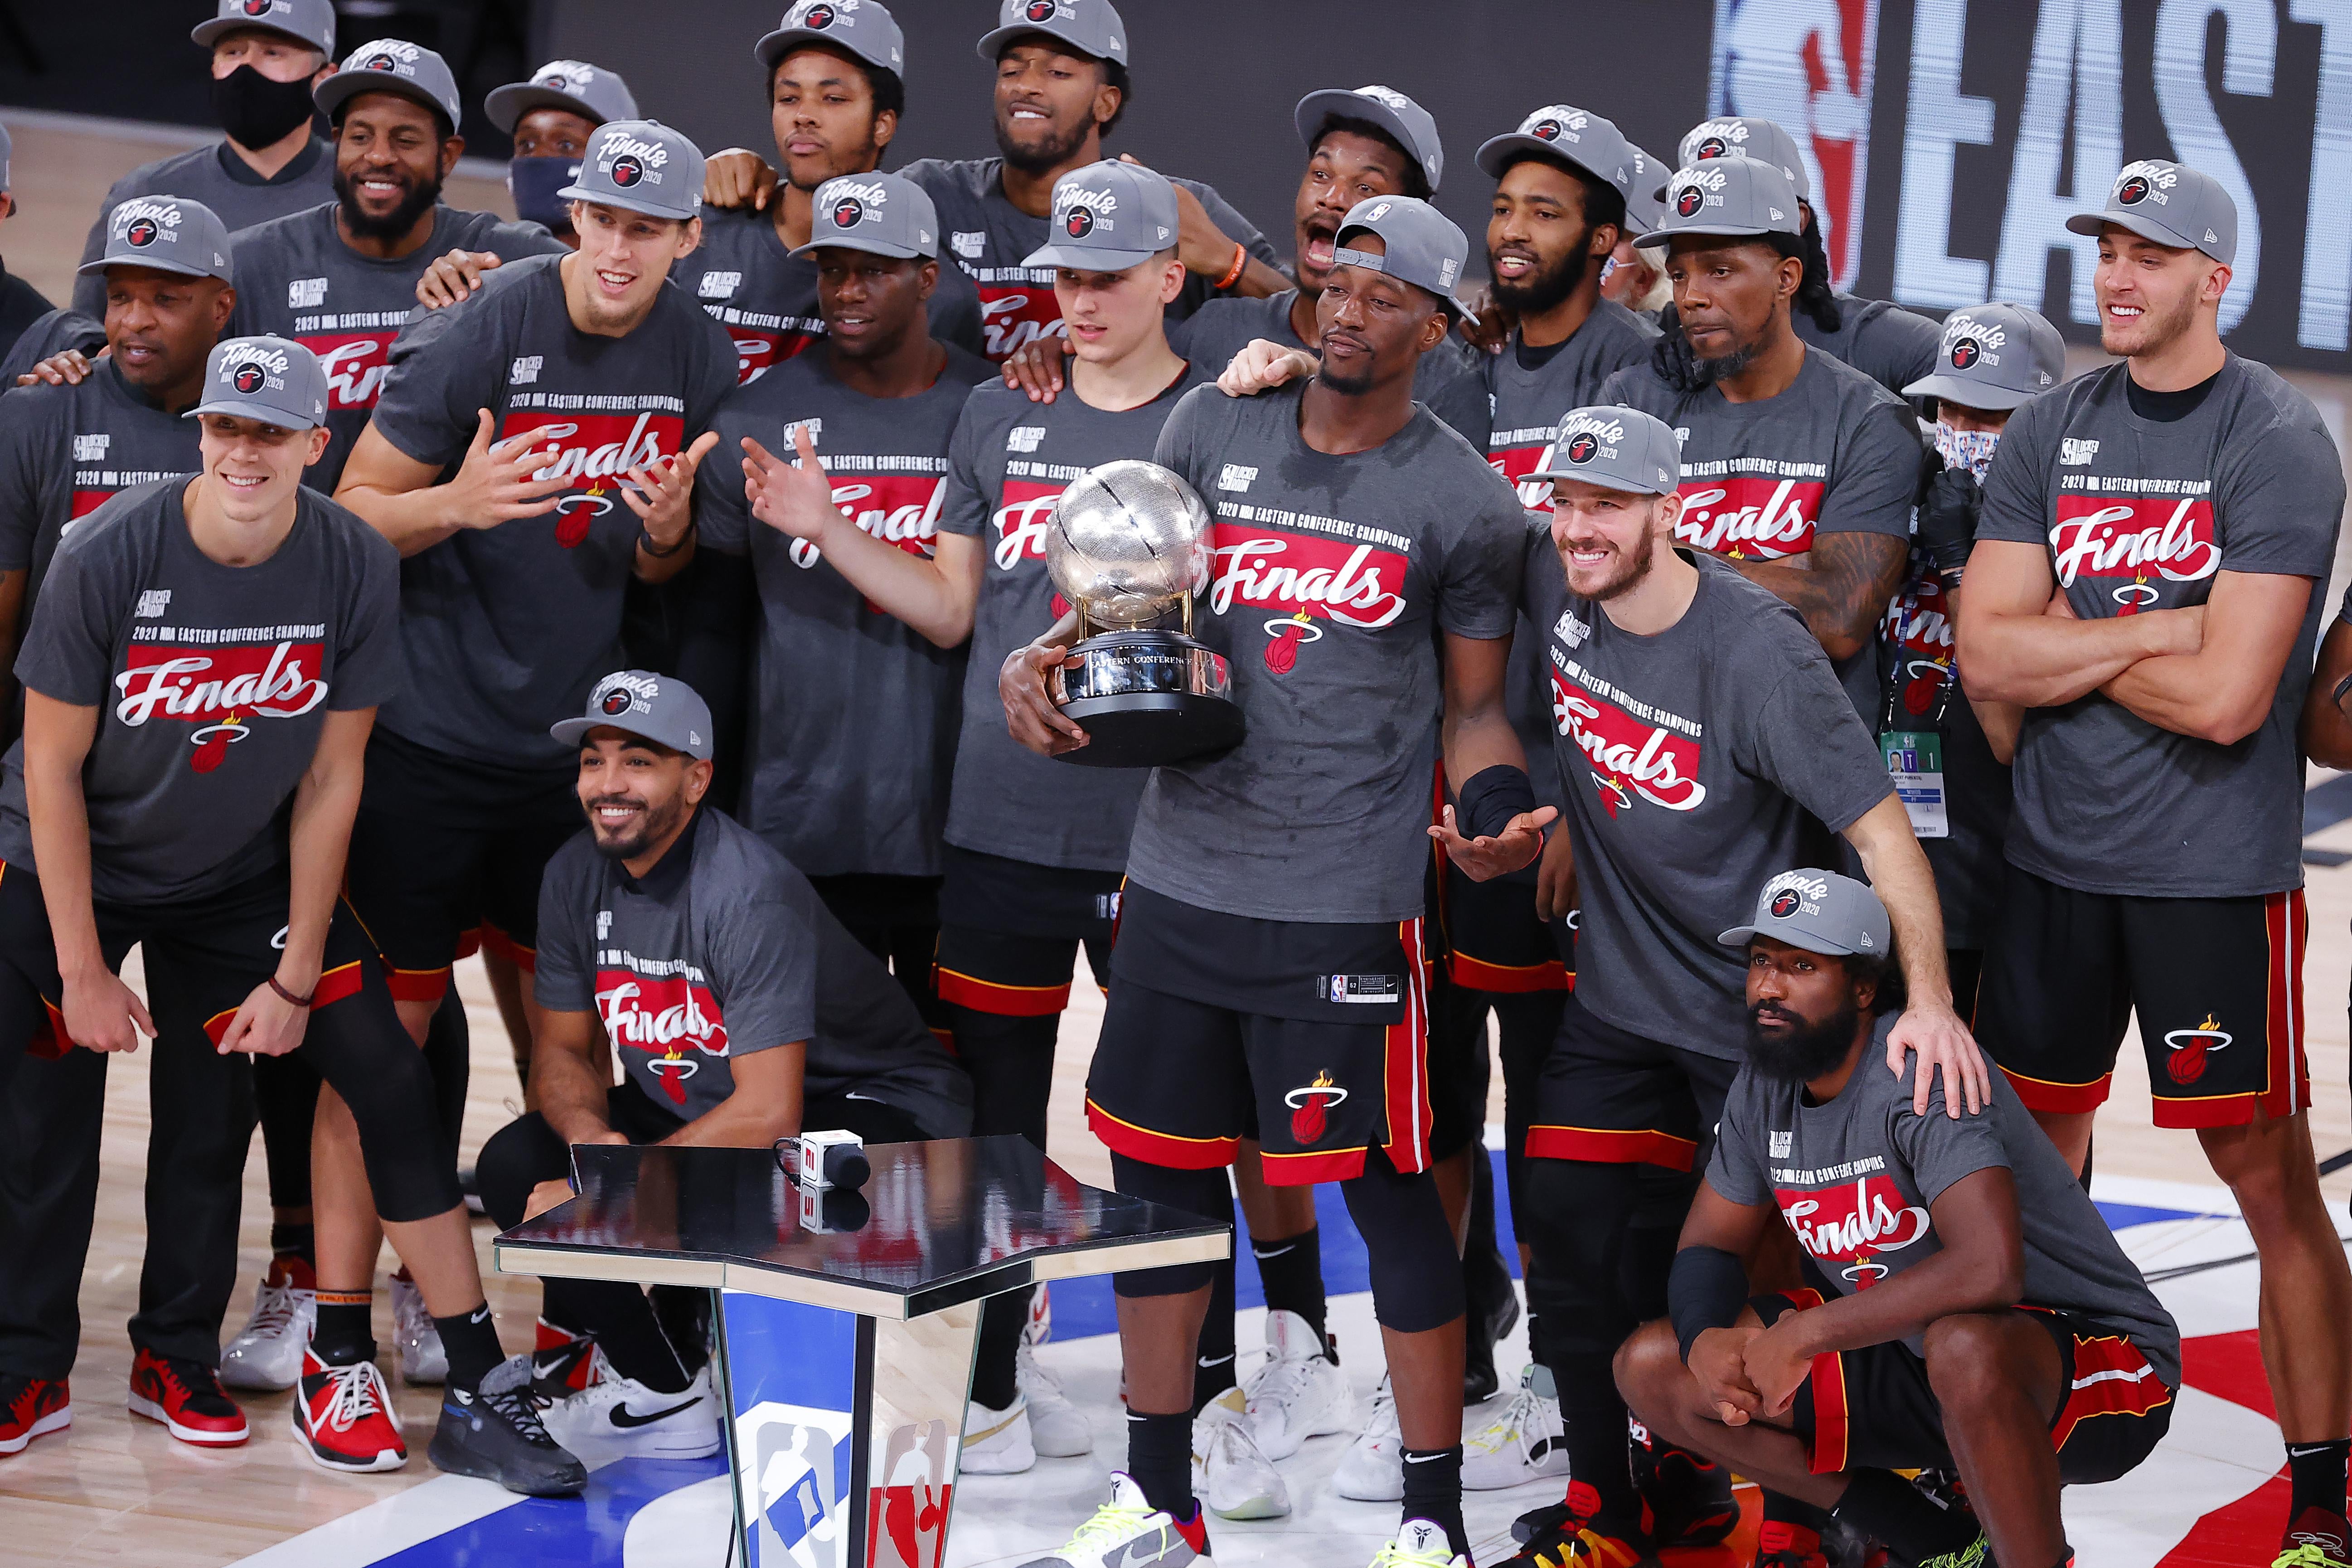 LAKE BUENA VISTA, FLORIDA - SEPTEMBER 27: The  Miami Heat celebrate with the trophy after they are Eastern Finals Champions against the Boston Celtics in Game Six of the Eastern Conference Finals during the 2020 NBA Playoffs at AdventHealth Arena at the ESPN Wide World Of Sports Complex on September 27, 2020 in Lake Buena Vista, Florida. NOTE TO USER: User expressly acknowledges and agrees that, by downloading and or using this photograph, User is consenting to the terms and conditions of the Getty Images License Agreement.  (Photo by Kevin C. Cox/Getty Images)